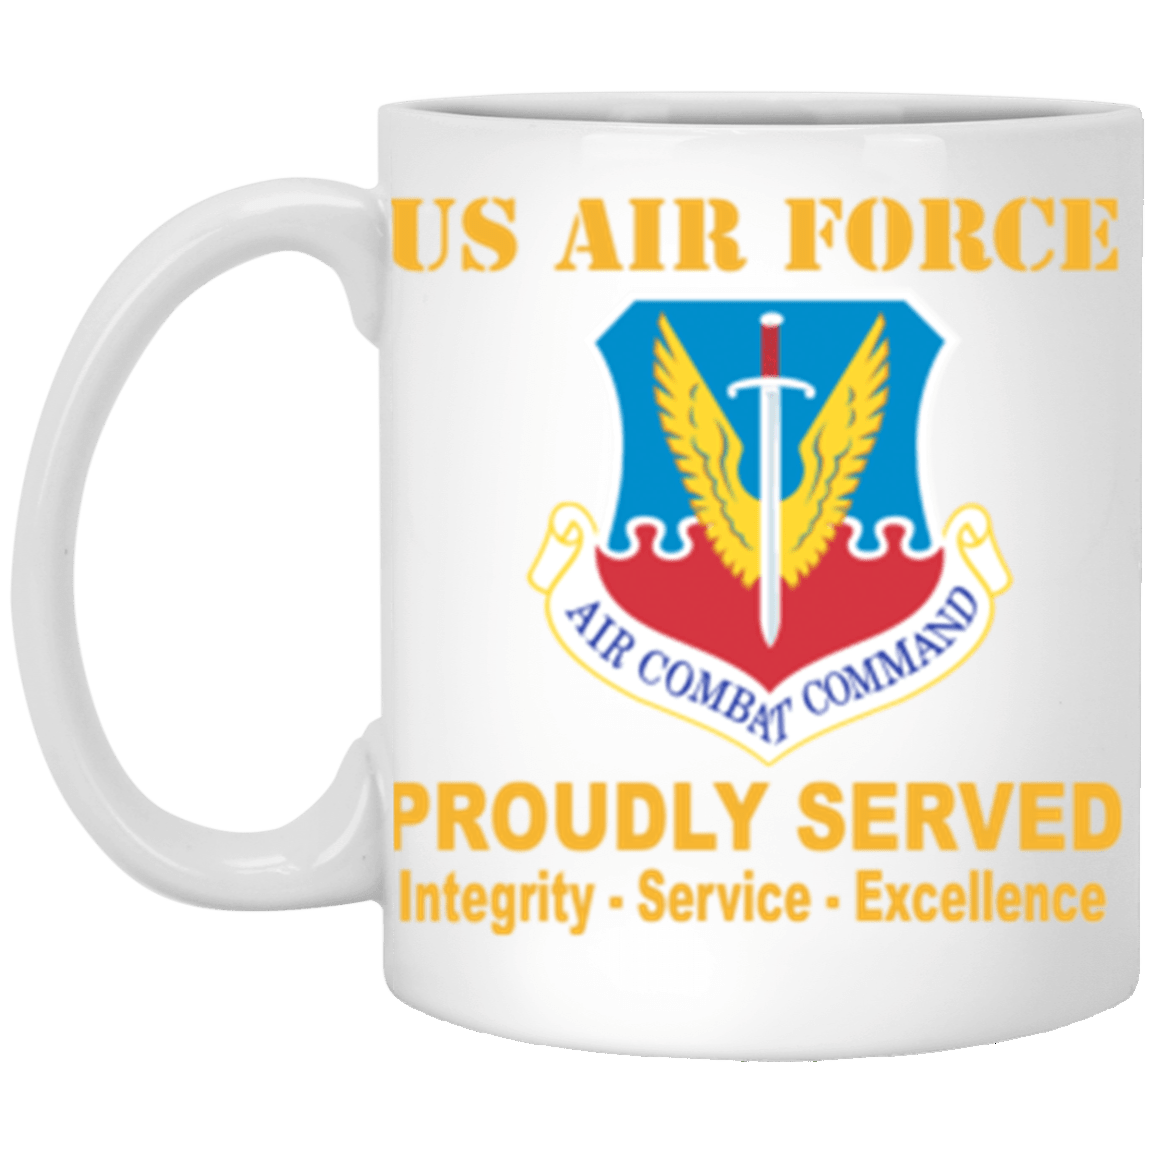 US Air Force Air Combat Command Proudly Served Core Values 11 oz. White Mug-Drinkware-Veterans Nation